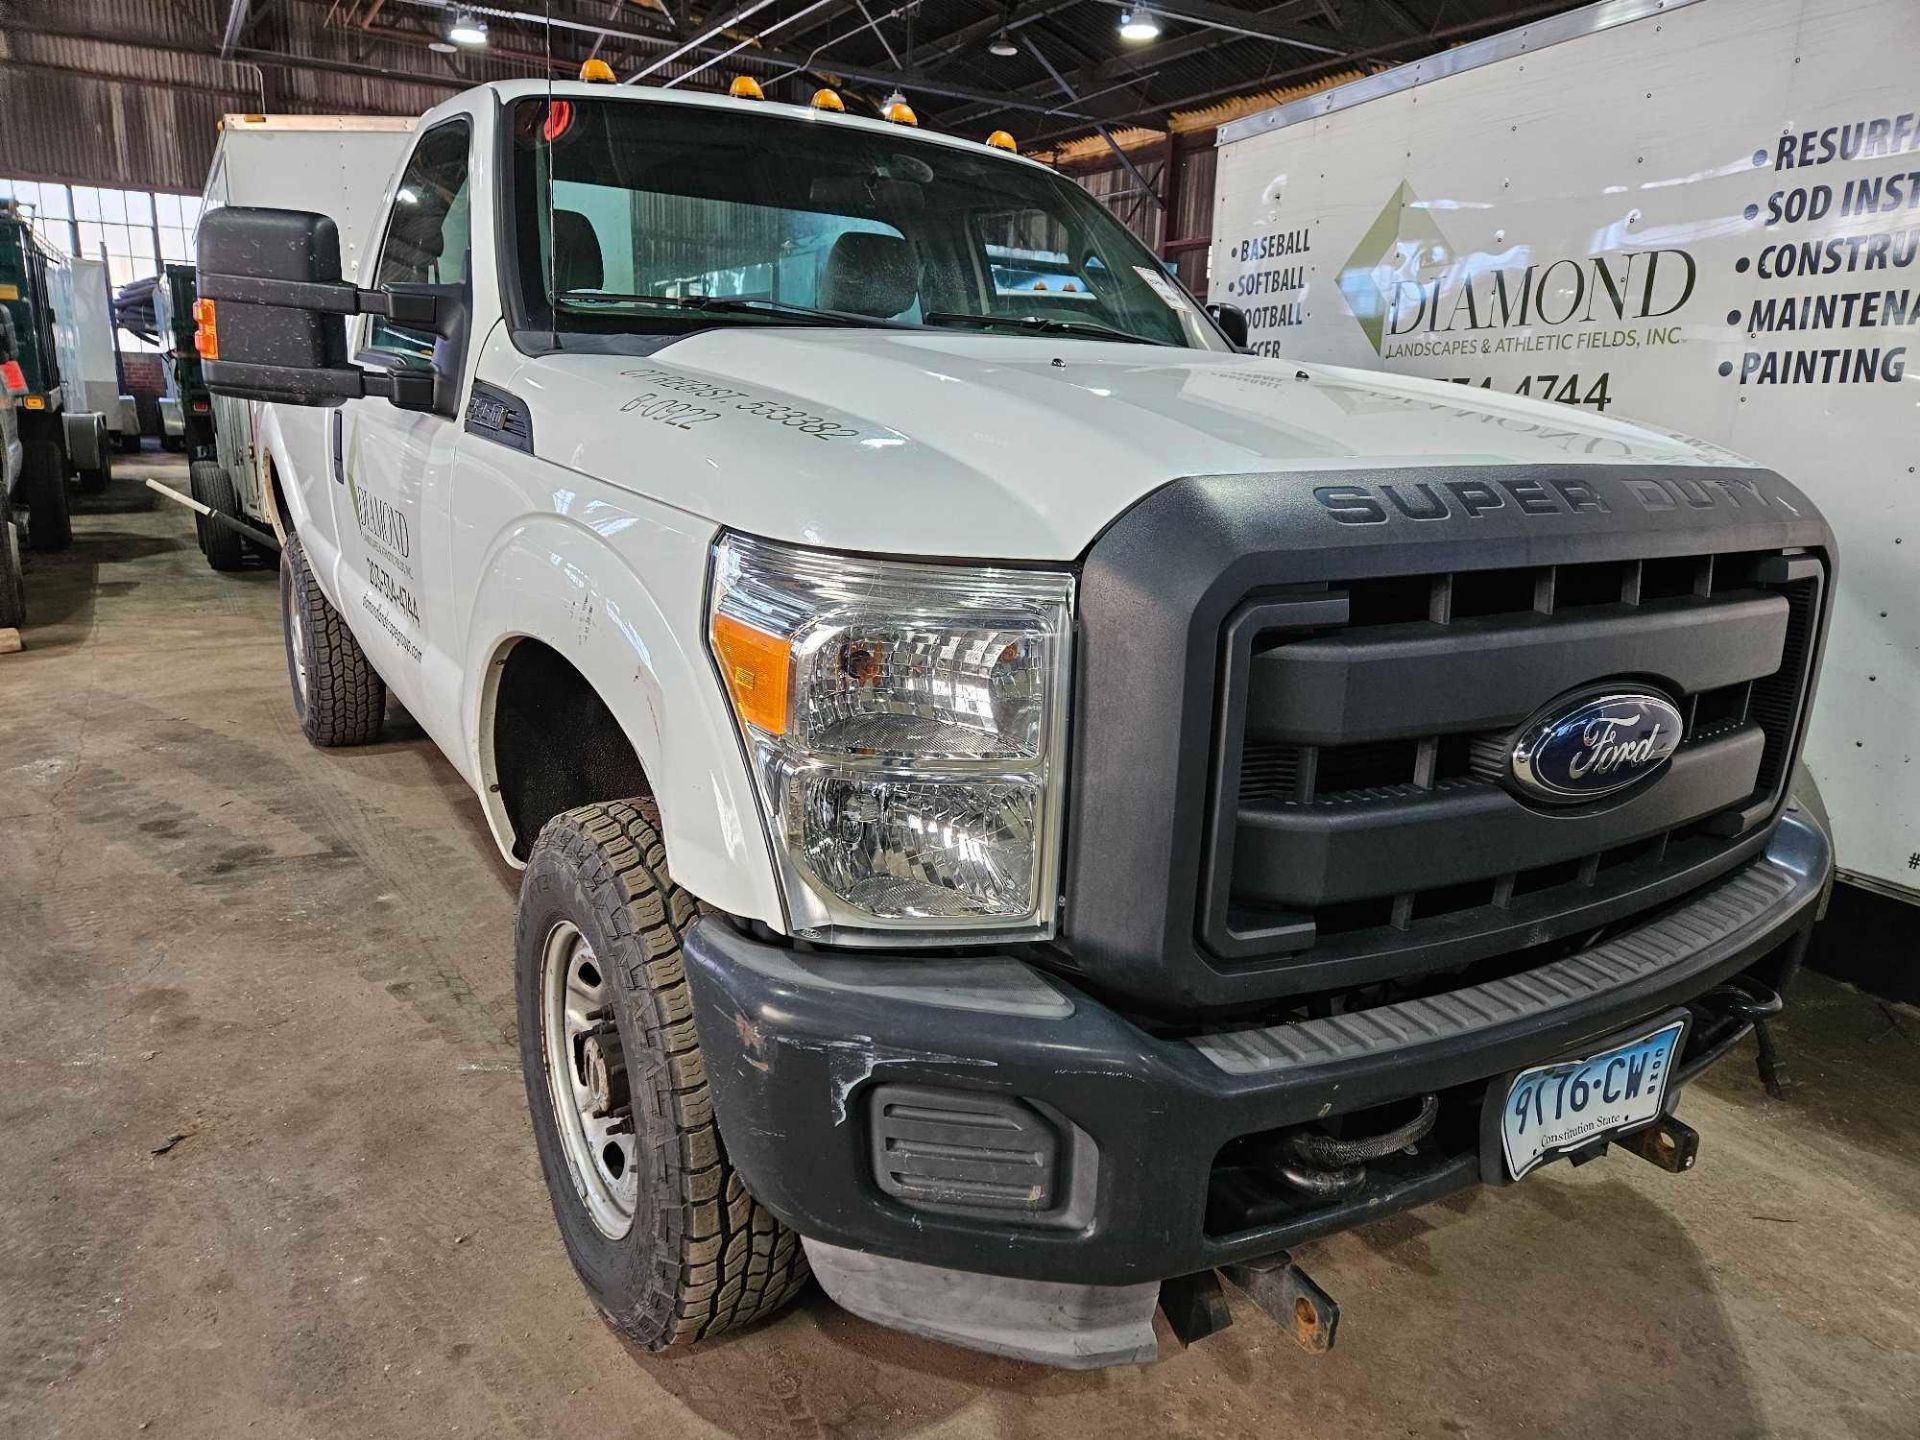 2014 Ford F350 Super Duty 4X4 - Image 2 of 6